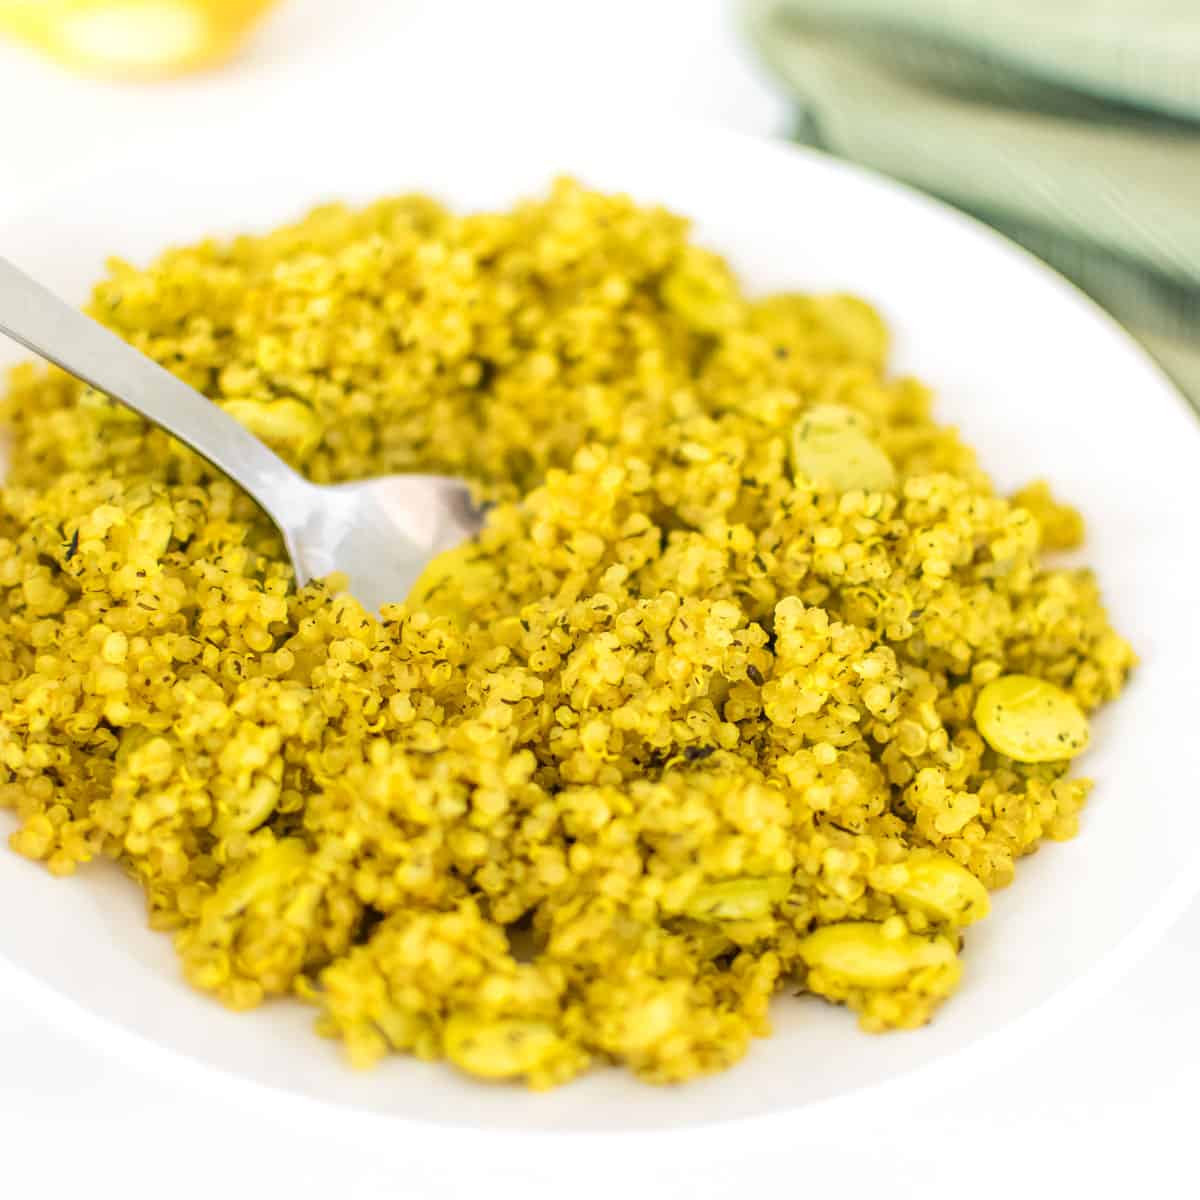 a spoon digging into lemon dill quinoa served in a plate.